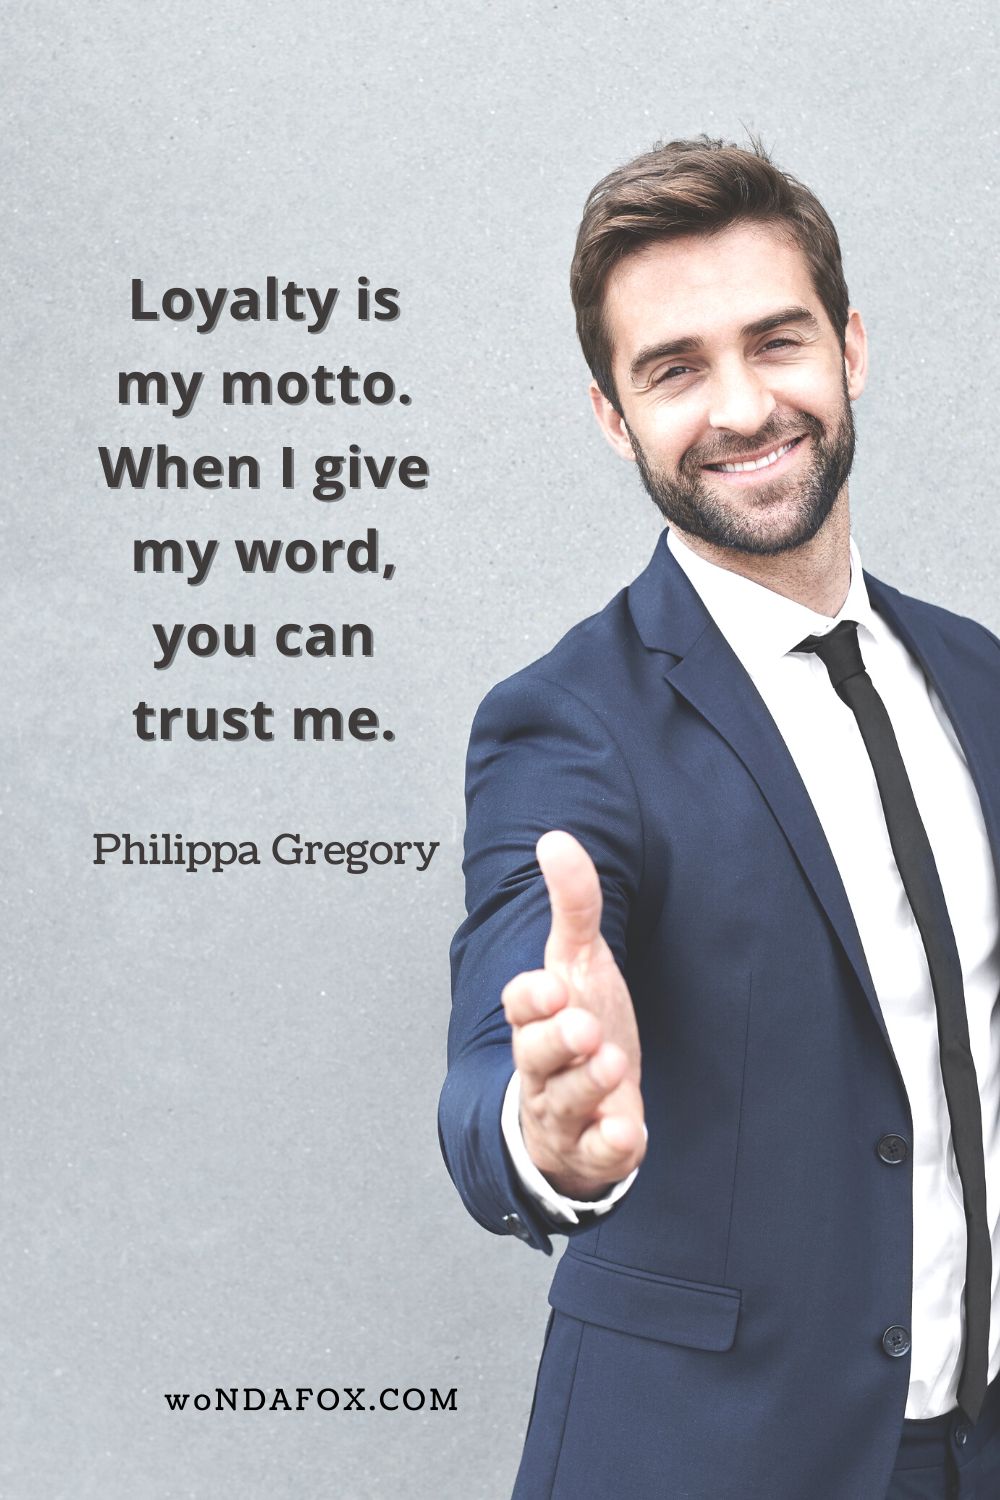 . “Loyalty is my motto. When I give my word, you can trust me.” 